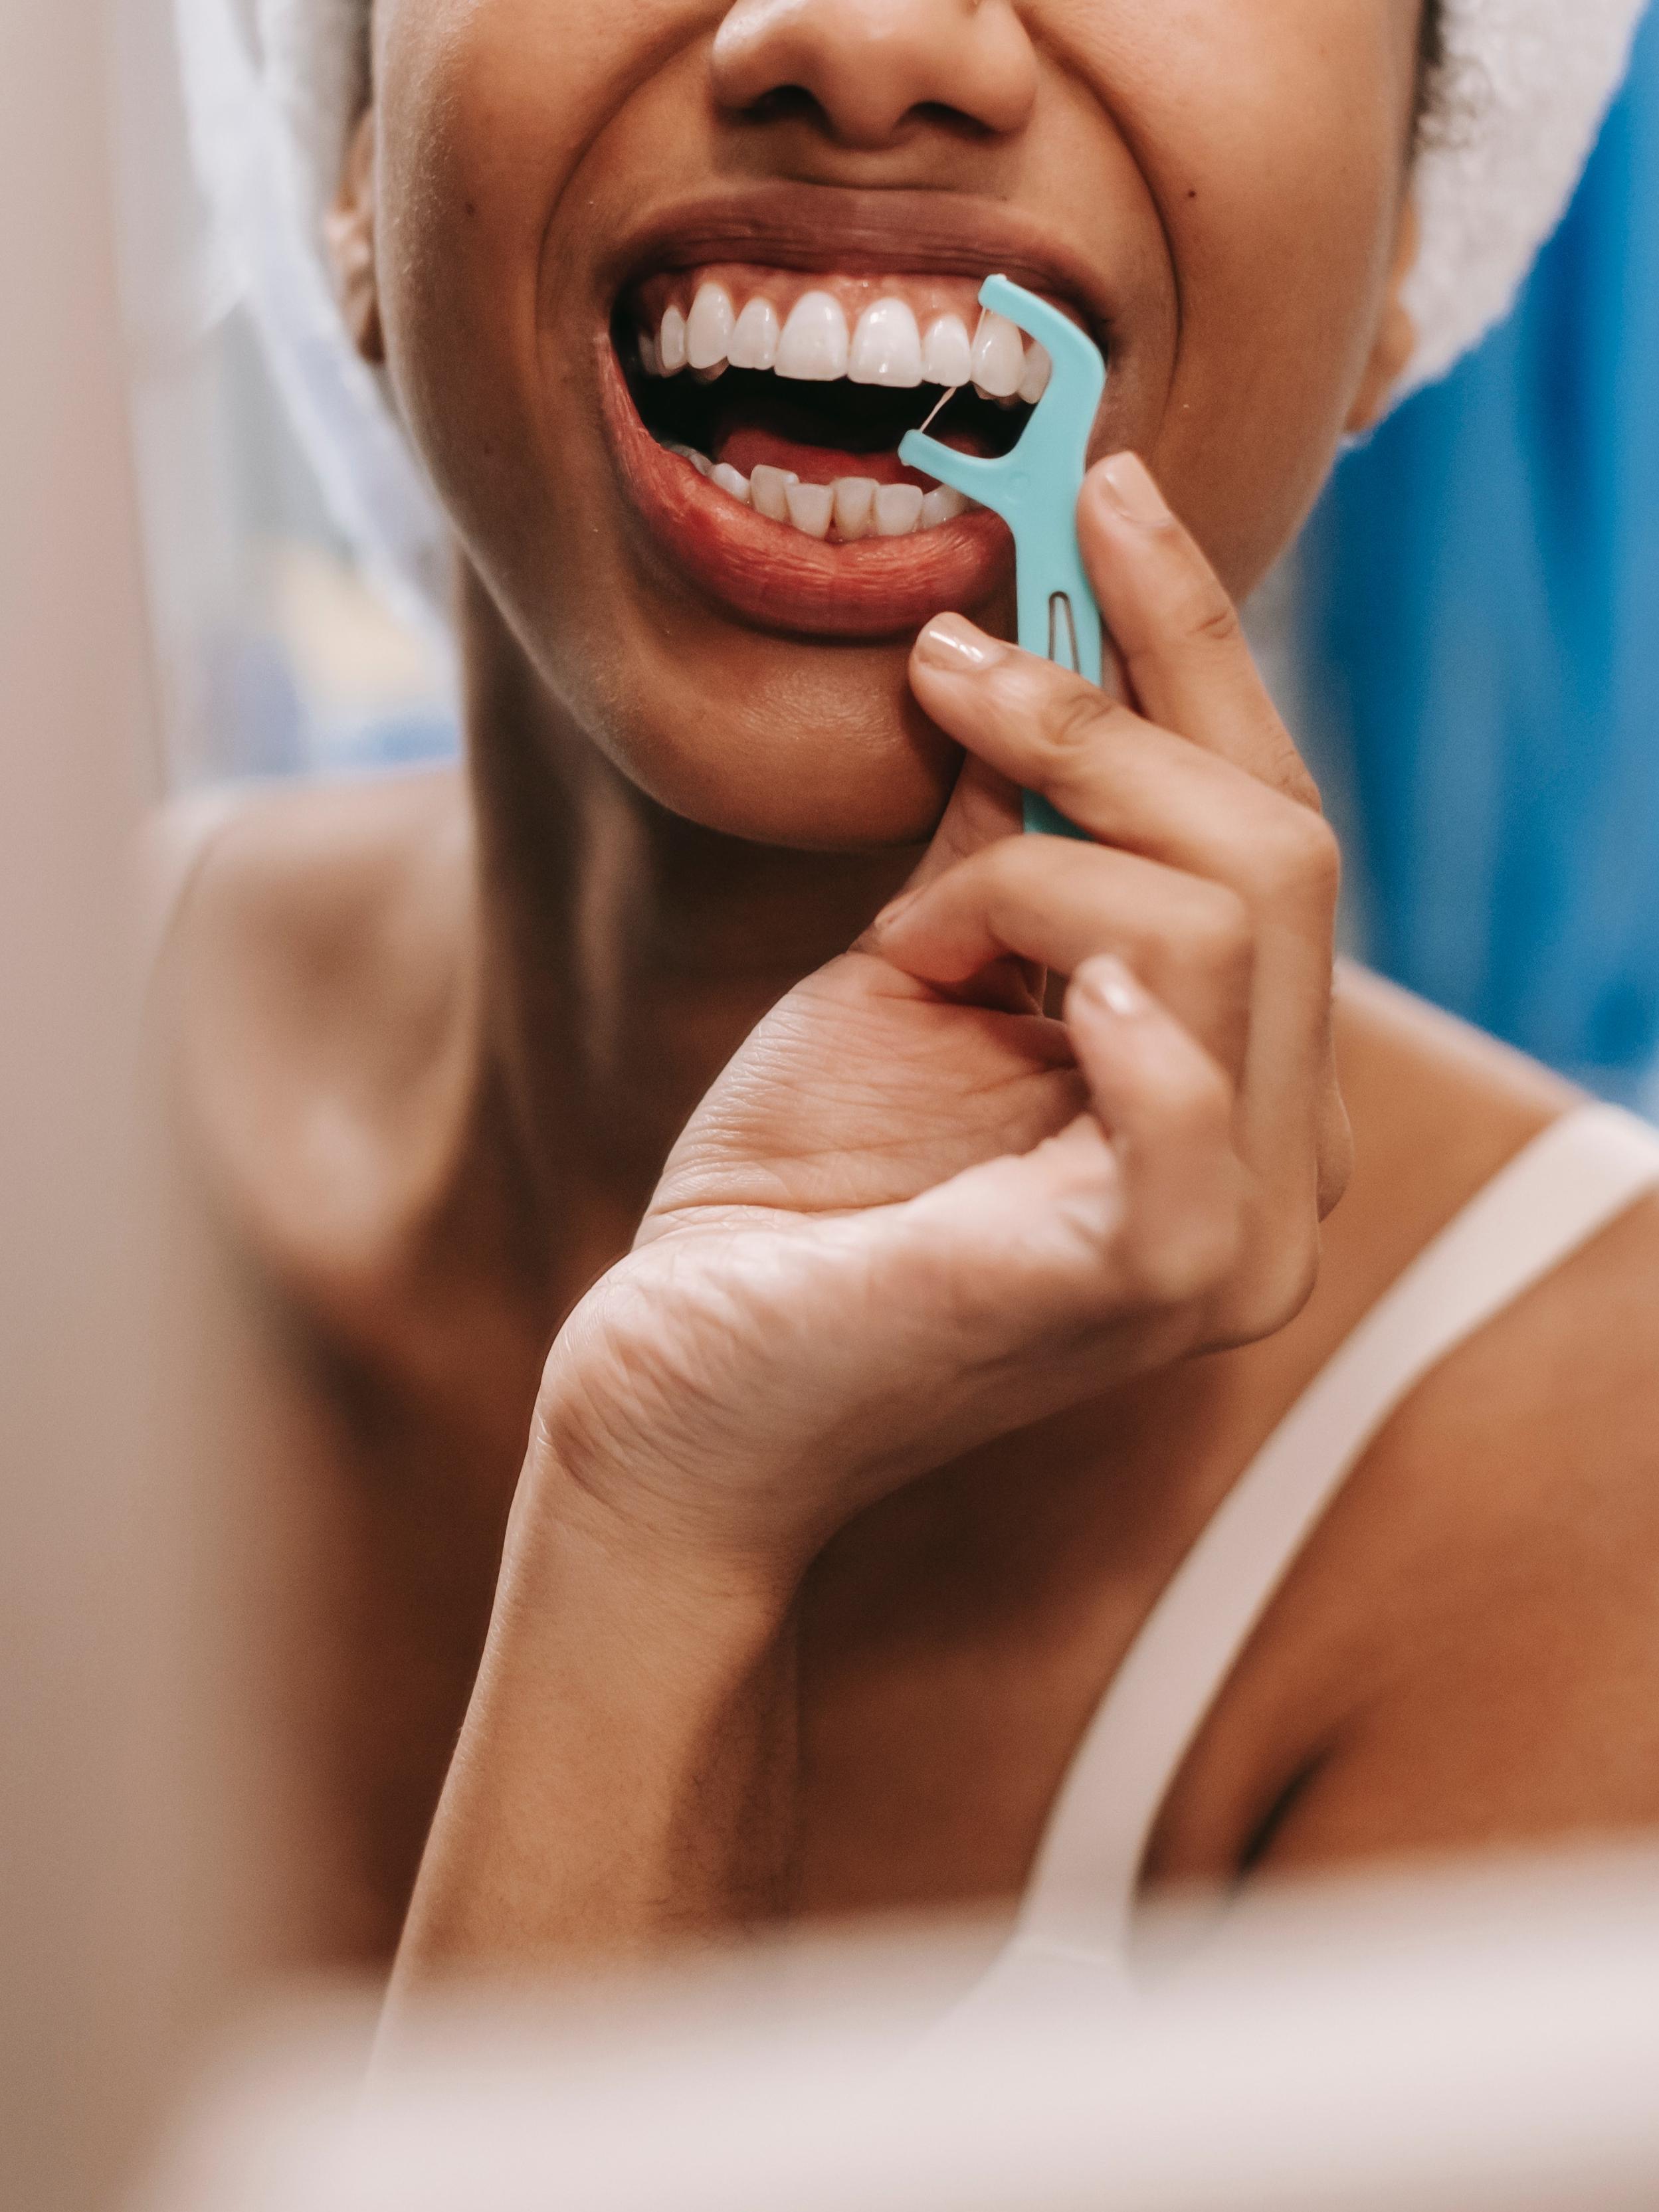 woman flossing her teeth with a floss pick